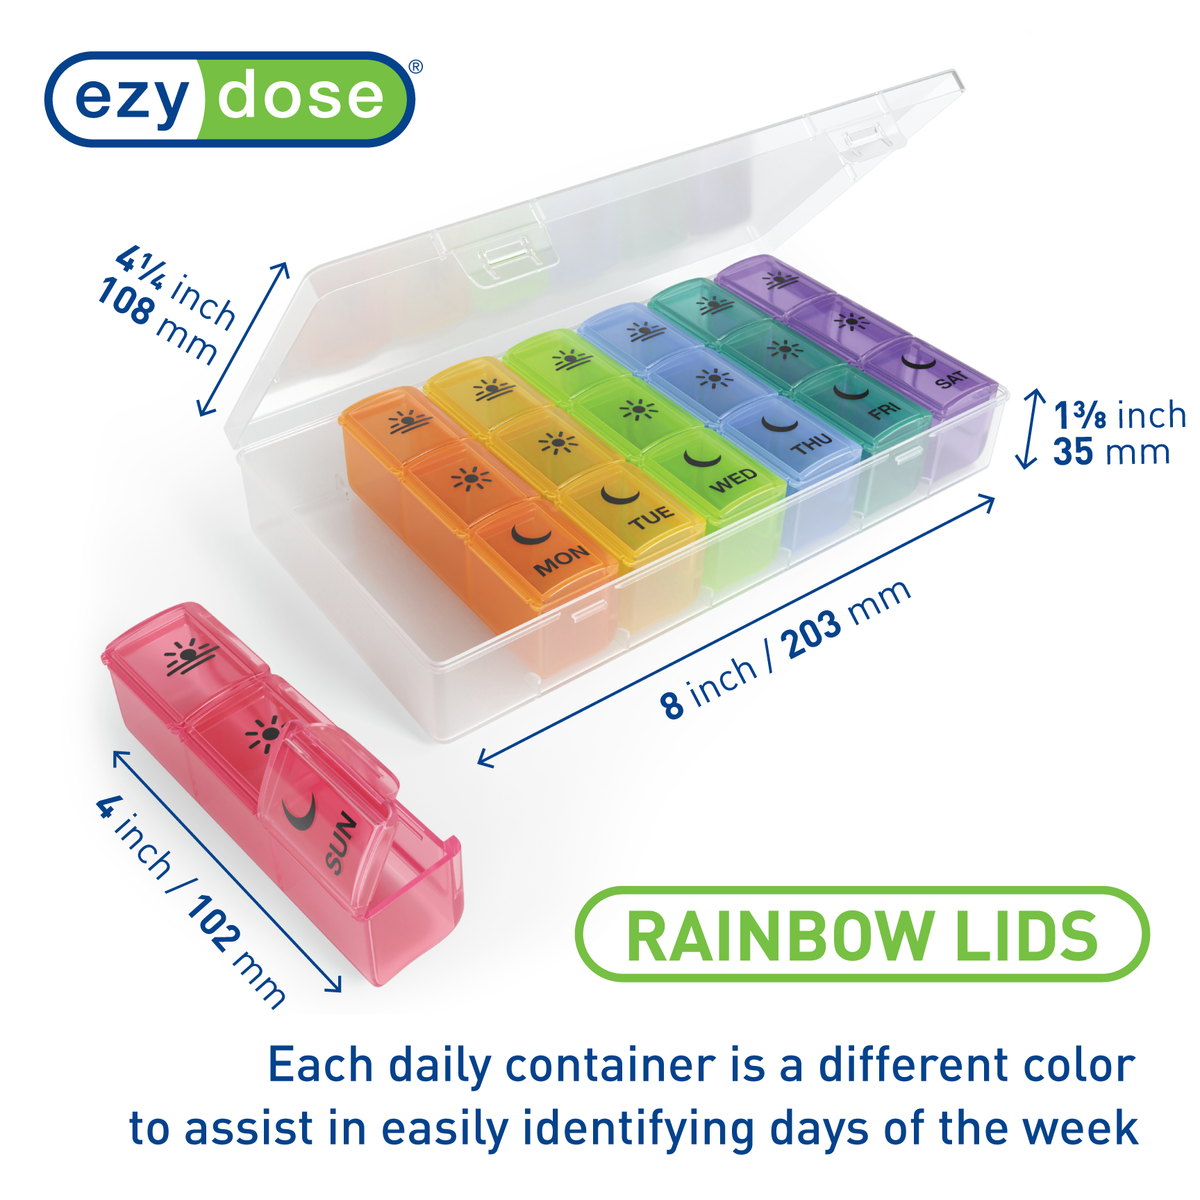 Rainbow weekly pill organizer has rainbow lids to assist in easily identifying days of the week